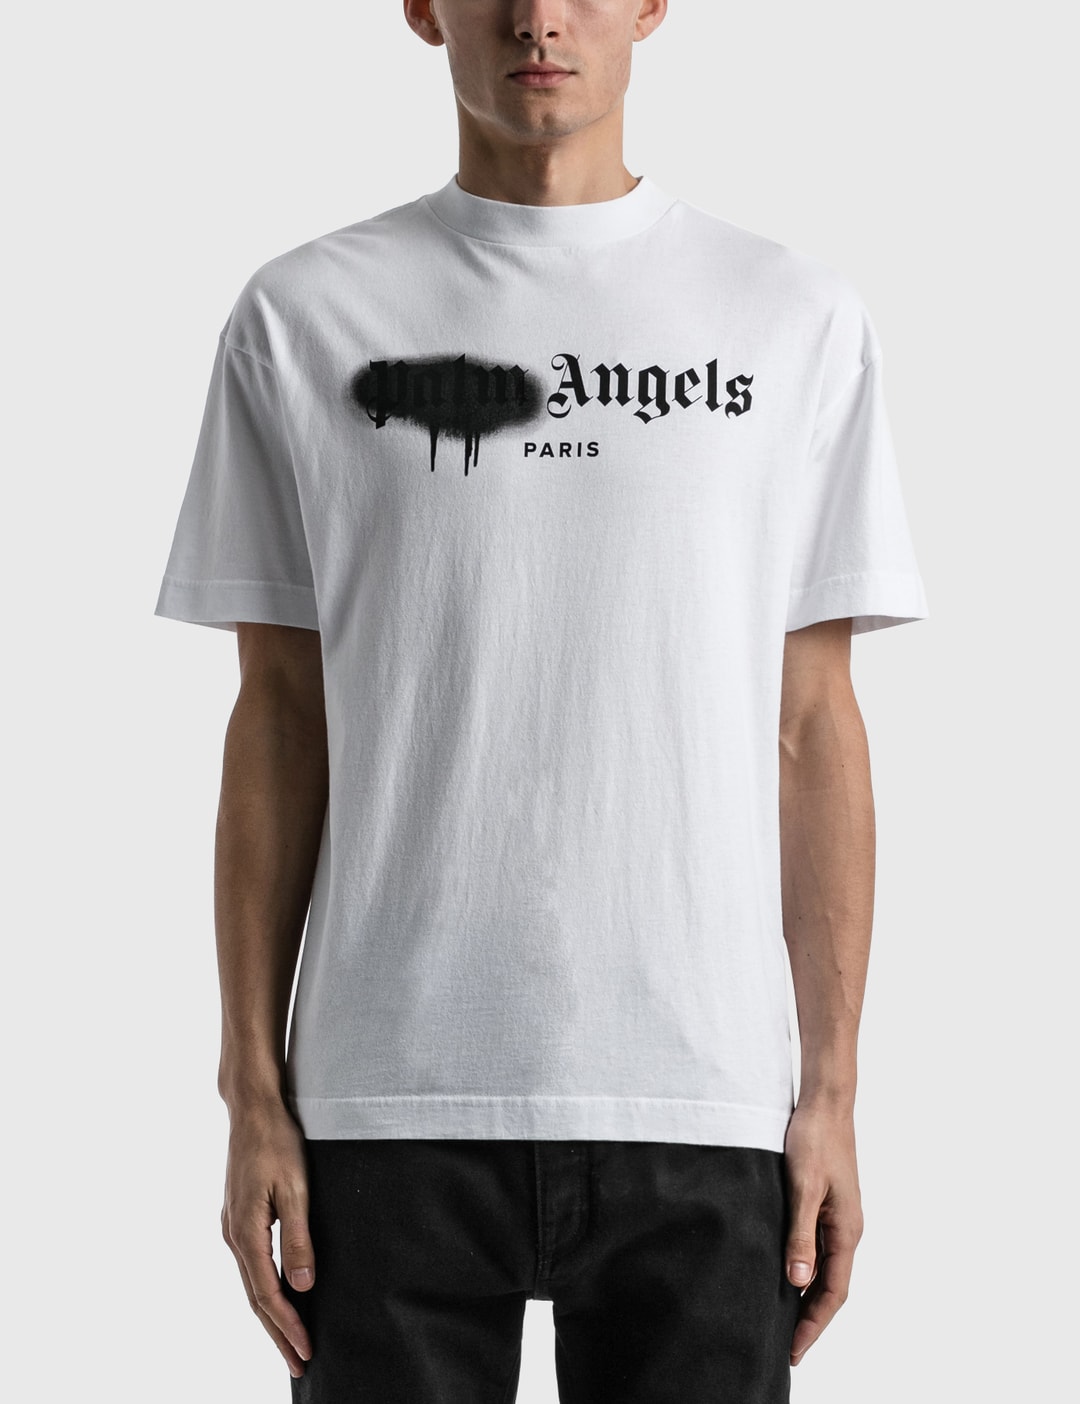 Palm Angels - Palm Beach Spray Logo T-shirt  HBX - Globally Curated  Fashion and Lifestyle by Hypebeast